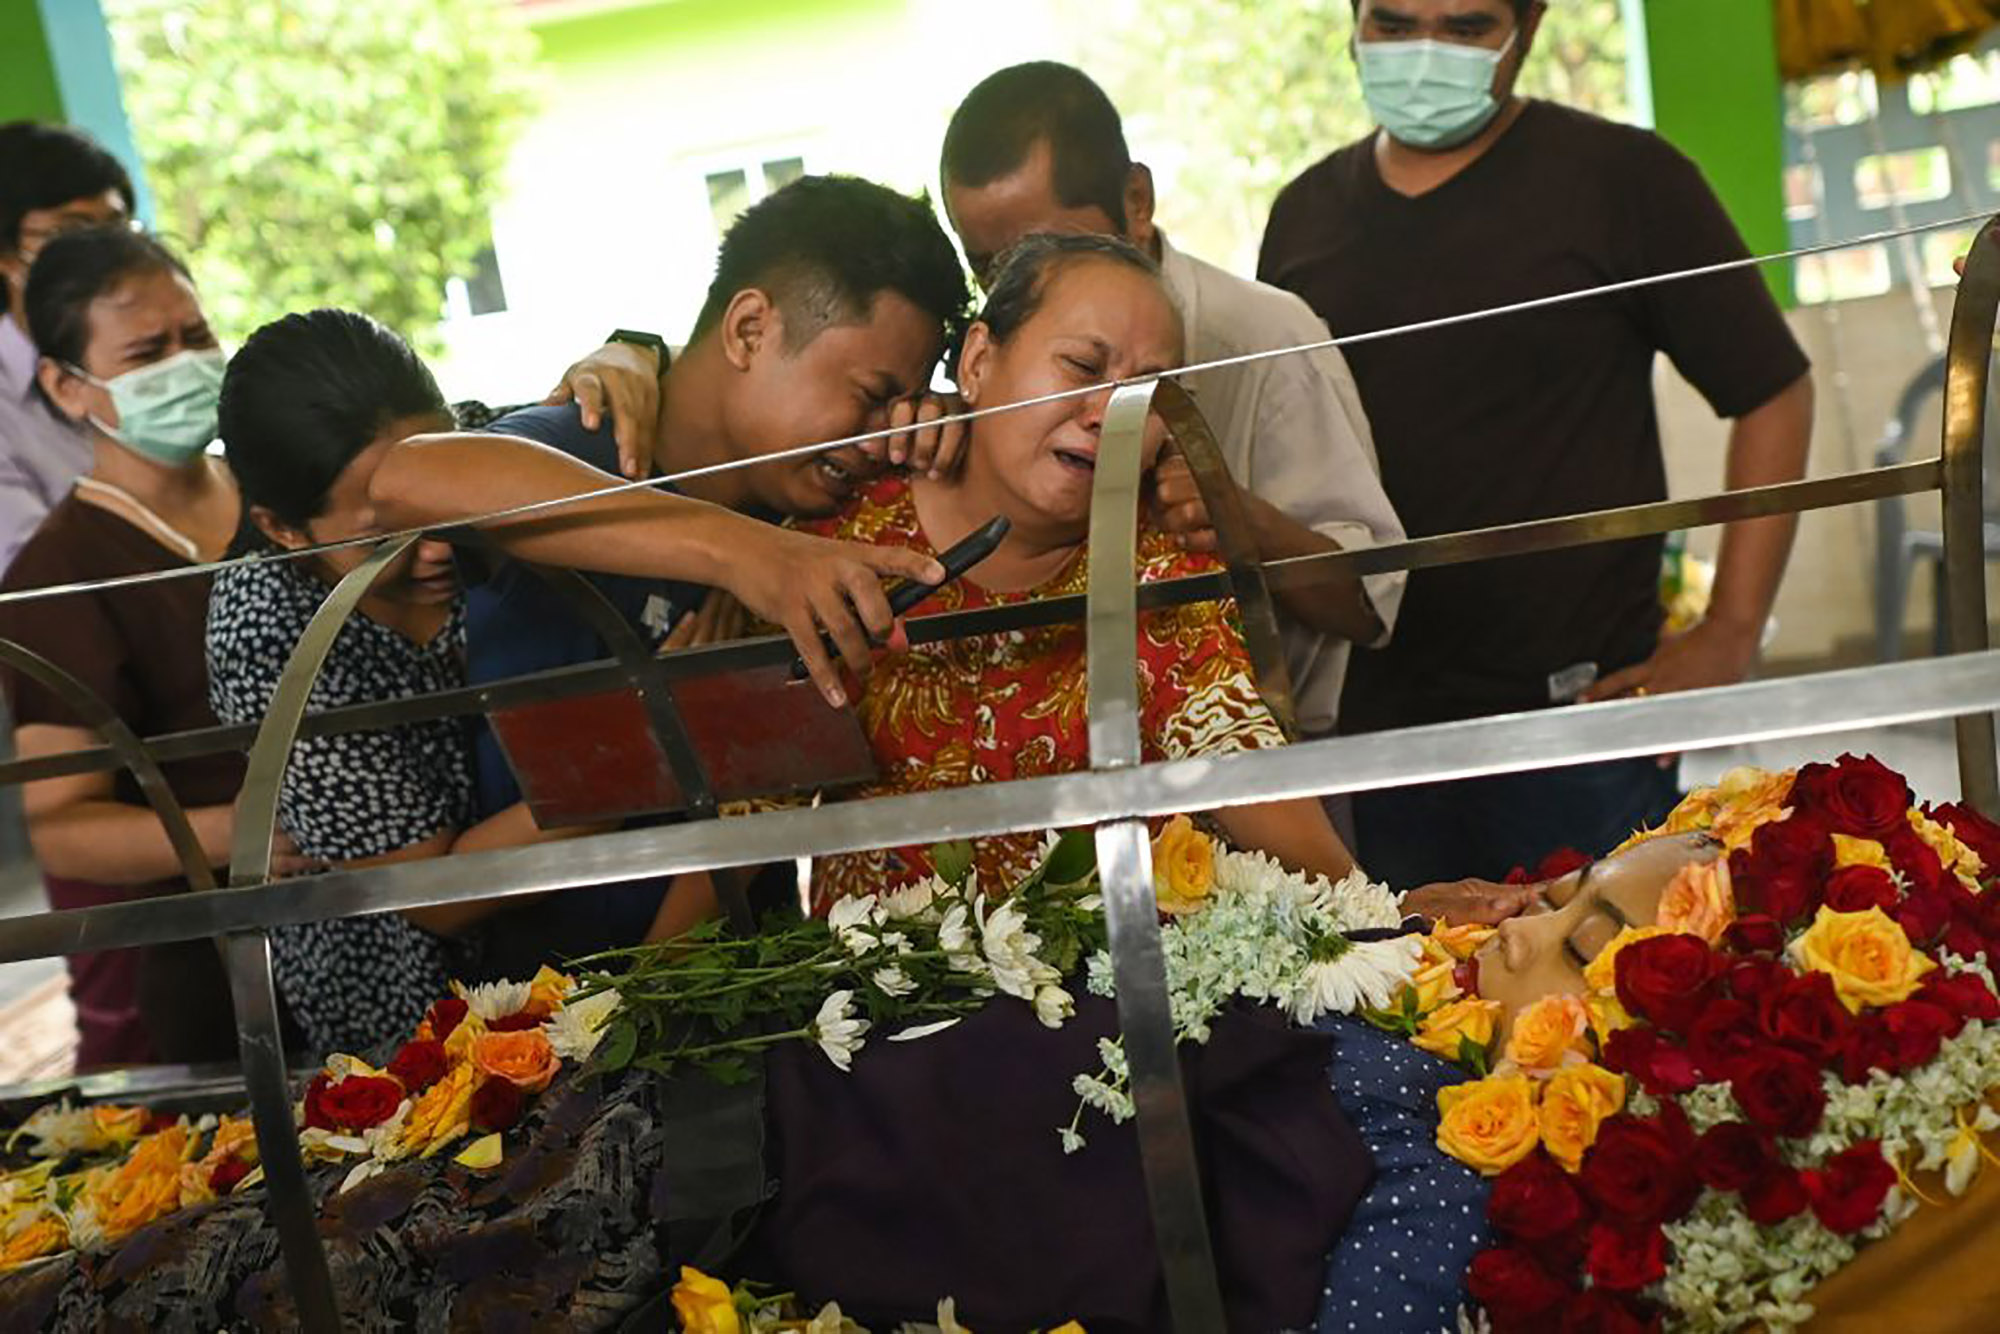 Relatives cry as they look at a body of a woman shot in her car on her way home from work, at Yayway cemetery in Yangon on April 2.&nbsp;